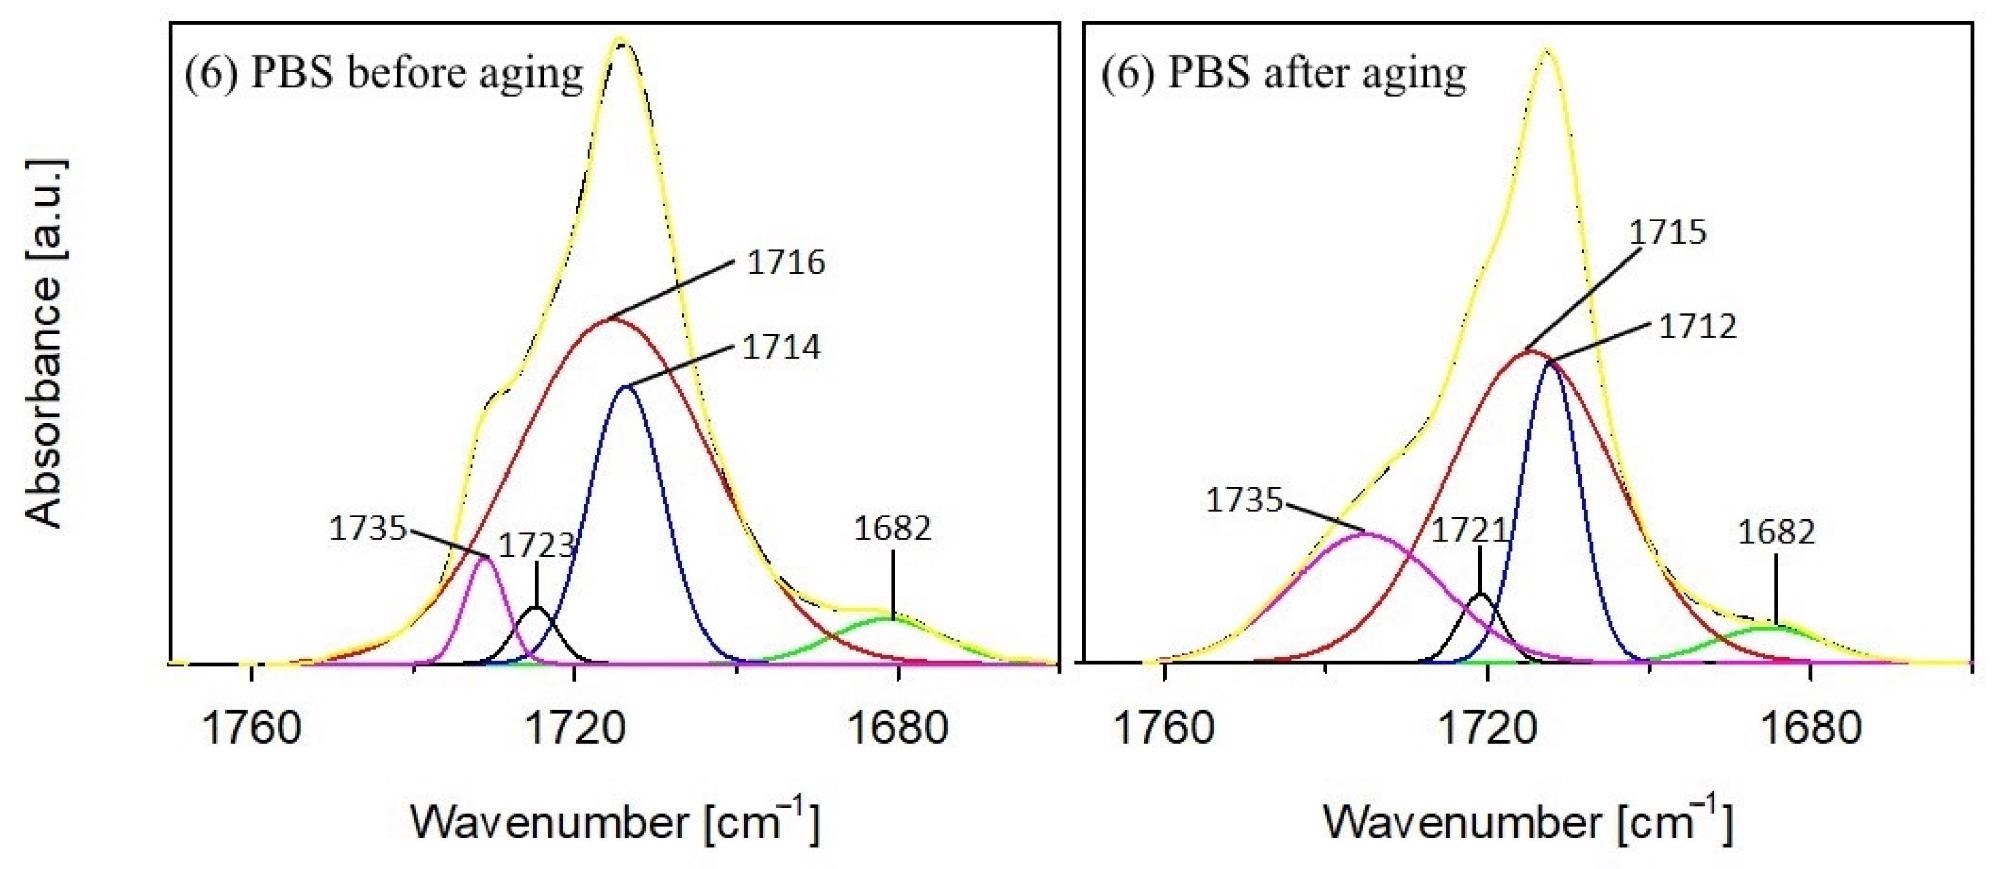 Deconvolution of the carbonyl stretching region of PBS before and after aging (dashed line: resolved peaks, solid line: recorded spectra).